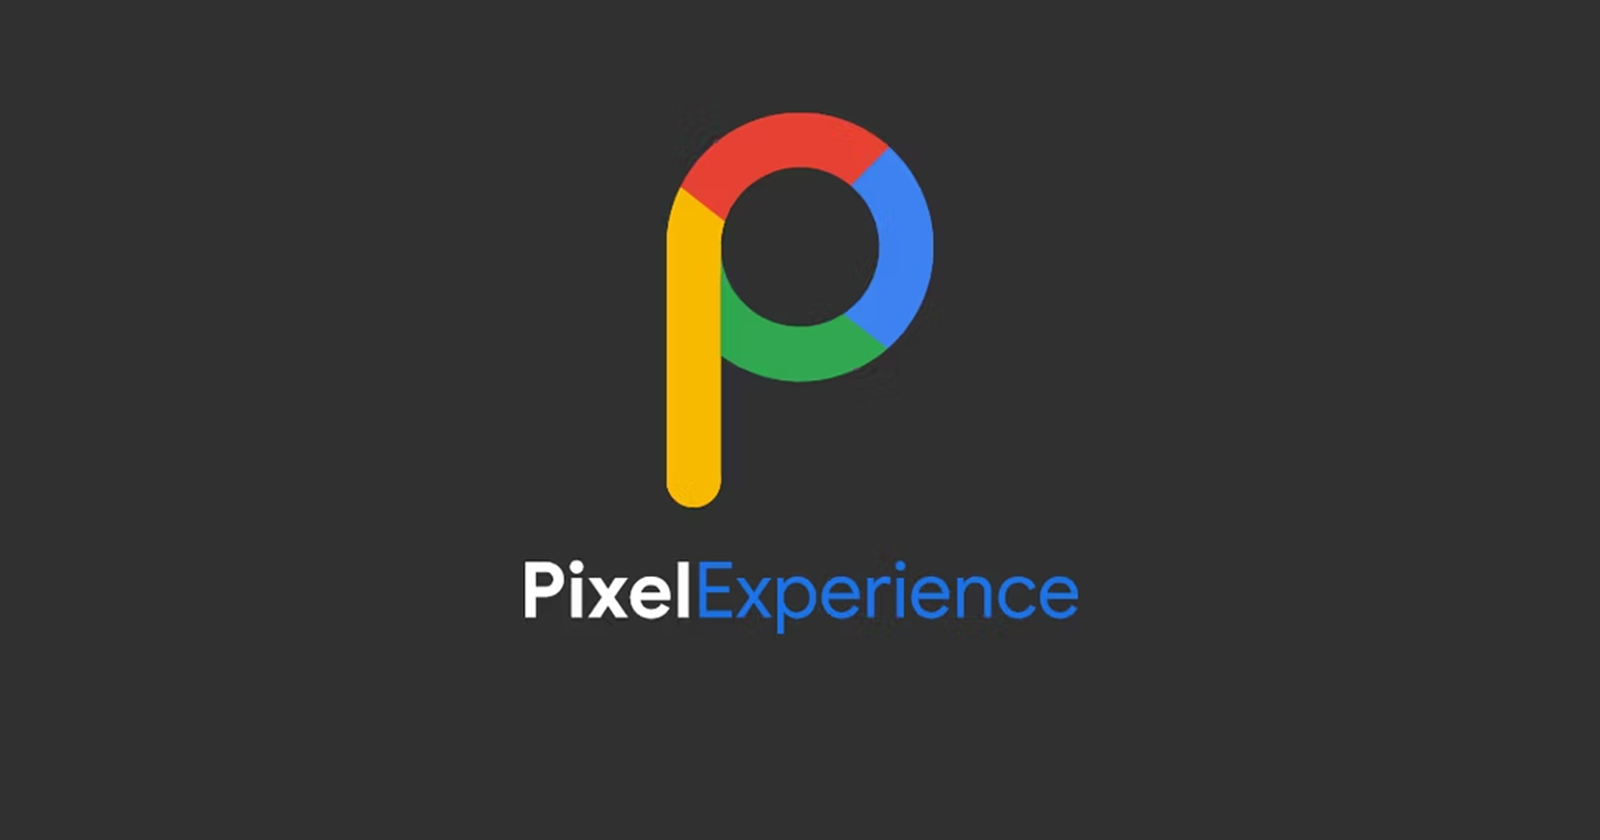 Pixel Experience Custom ROM project is dead and gone